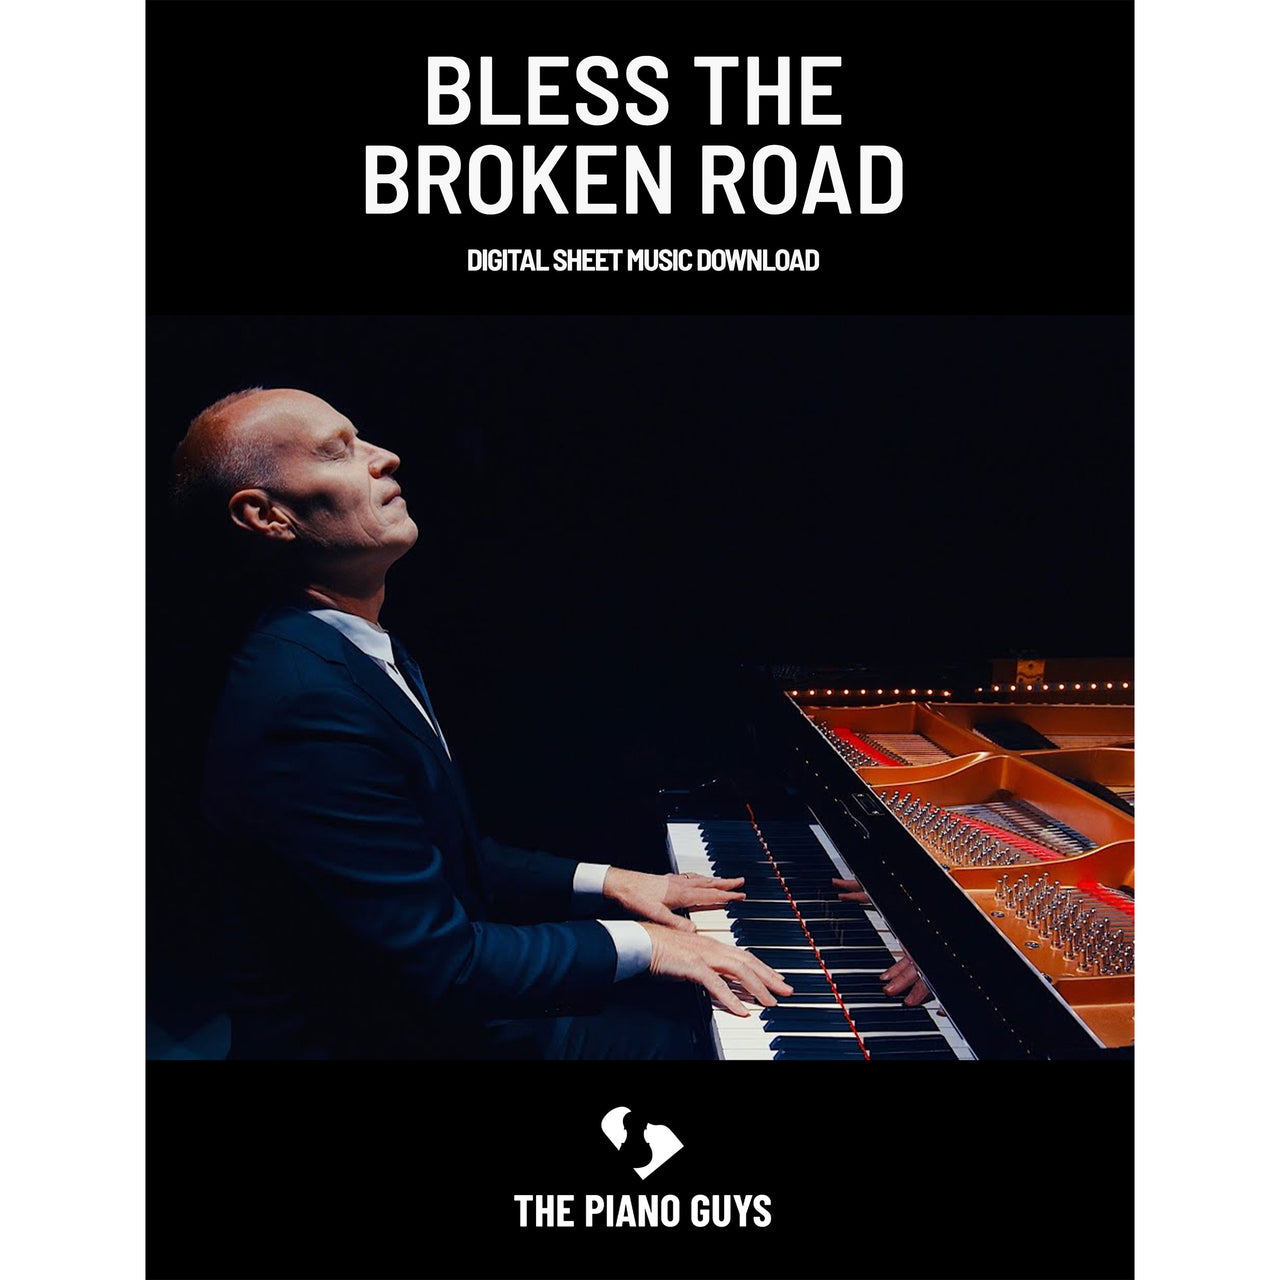 "Bless the Broken Road" - Sheet Music Single (PDF DOWNLOAD ONLY)